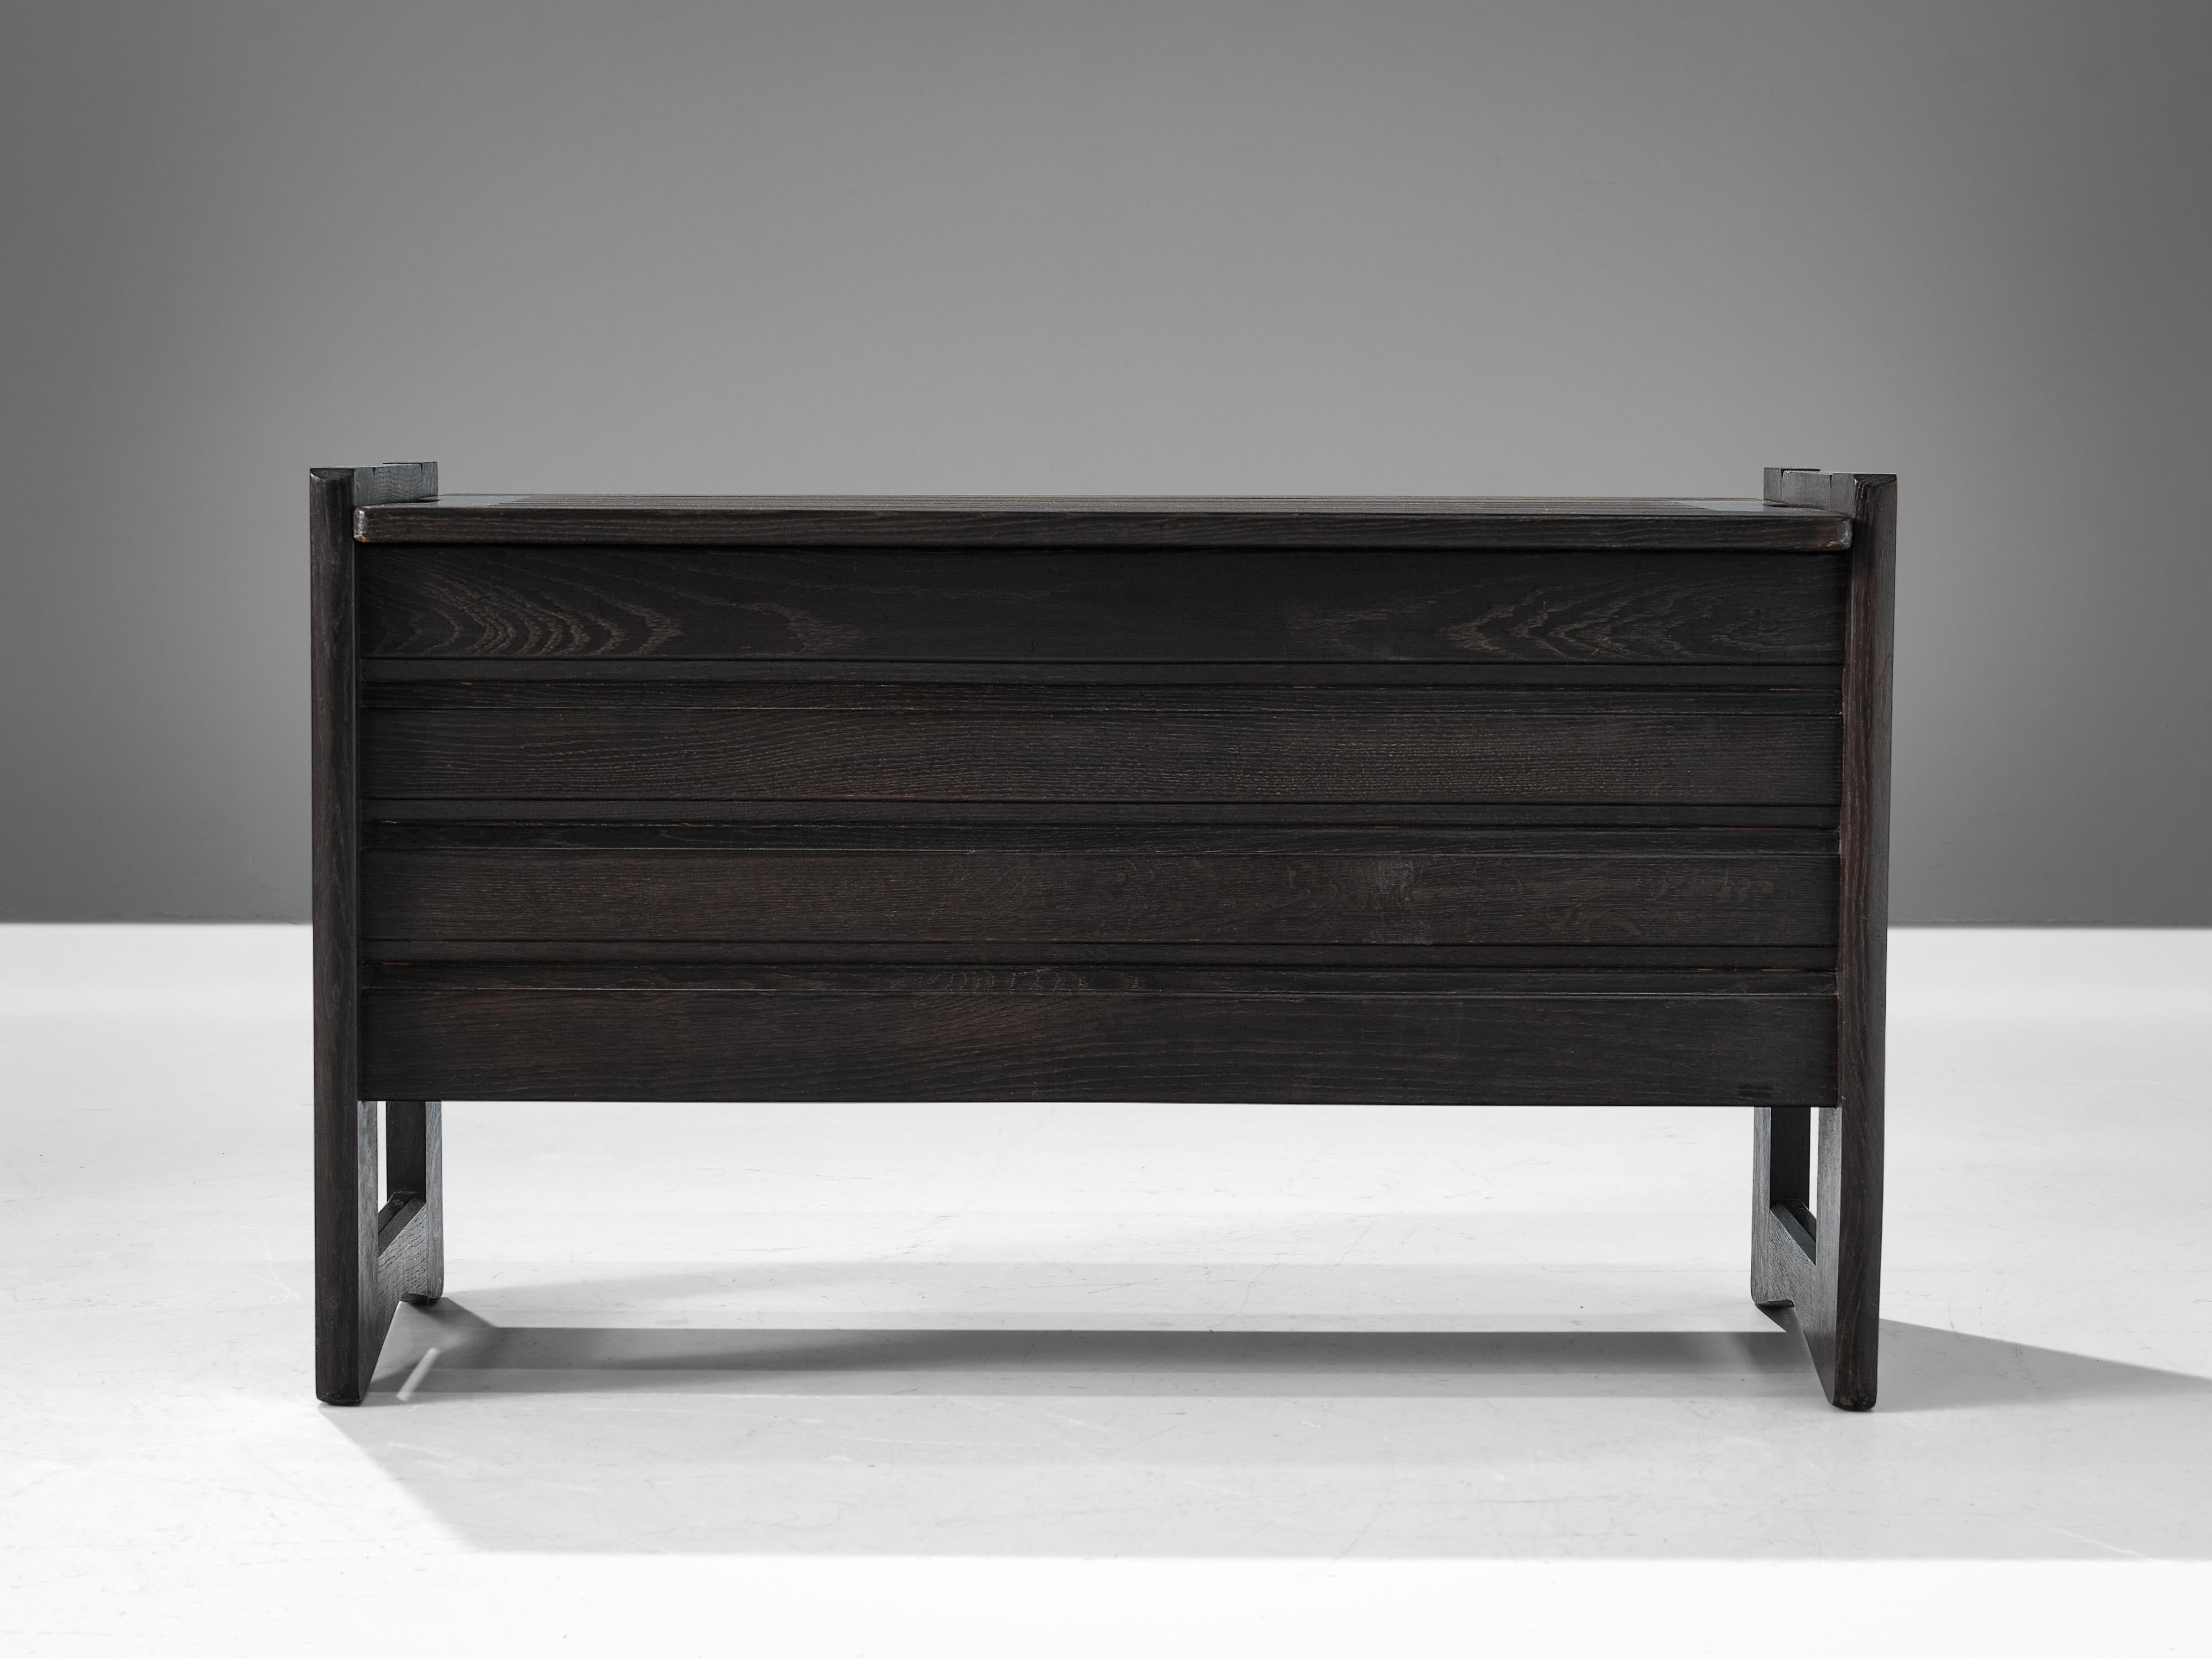 Guillerme et Chambron for Votre Maison, trunk or side bench, oak, brass, France, 1960s

This rare cubic blanket chest is made by the designer duo Guillerme & Chambron. This particular design is characterized by a solid construction with expertly